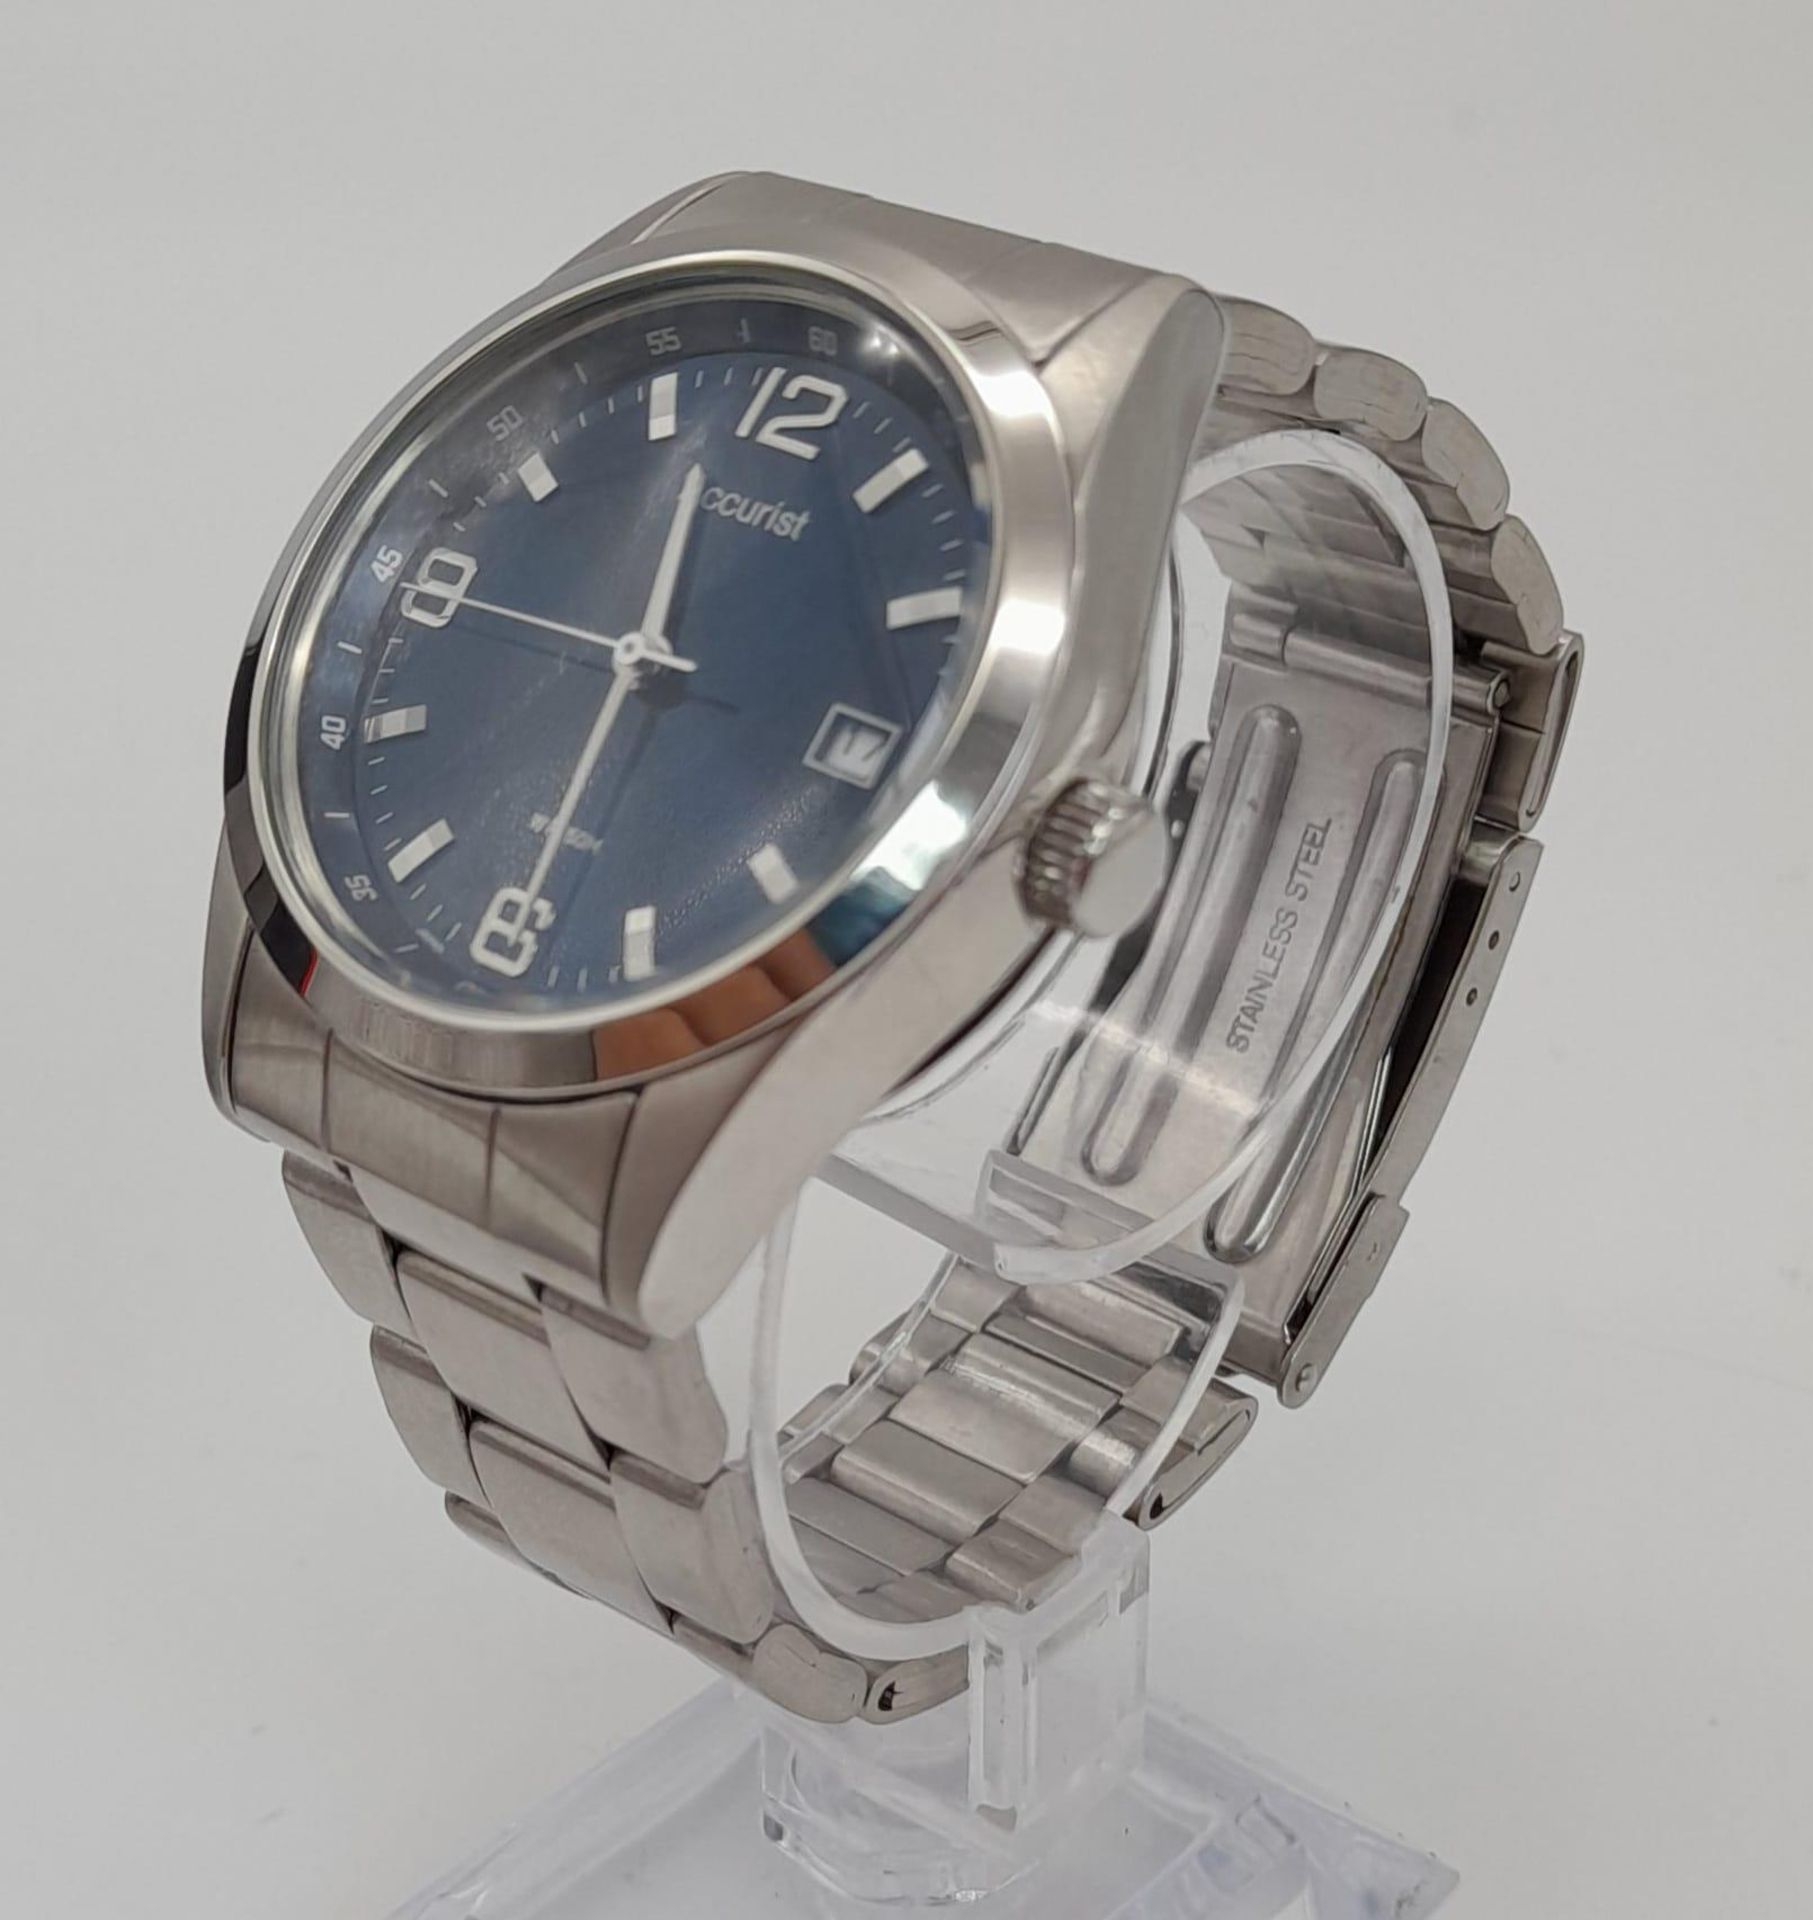 Excellent Condition, Accurist Blue Face Quartz Date Watch. 38mm Including Crown. Comes with Box,